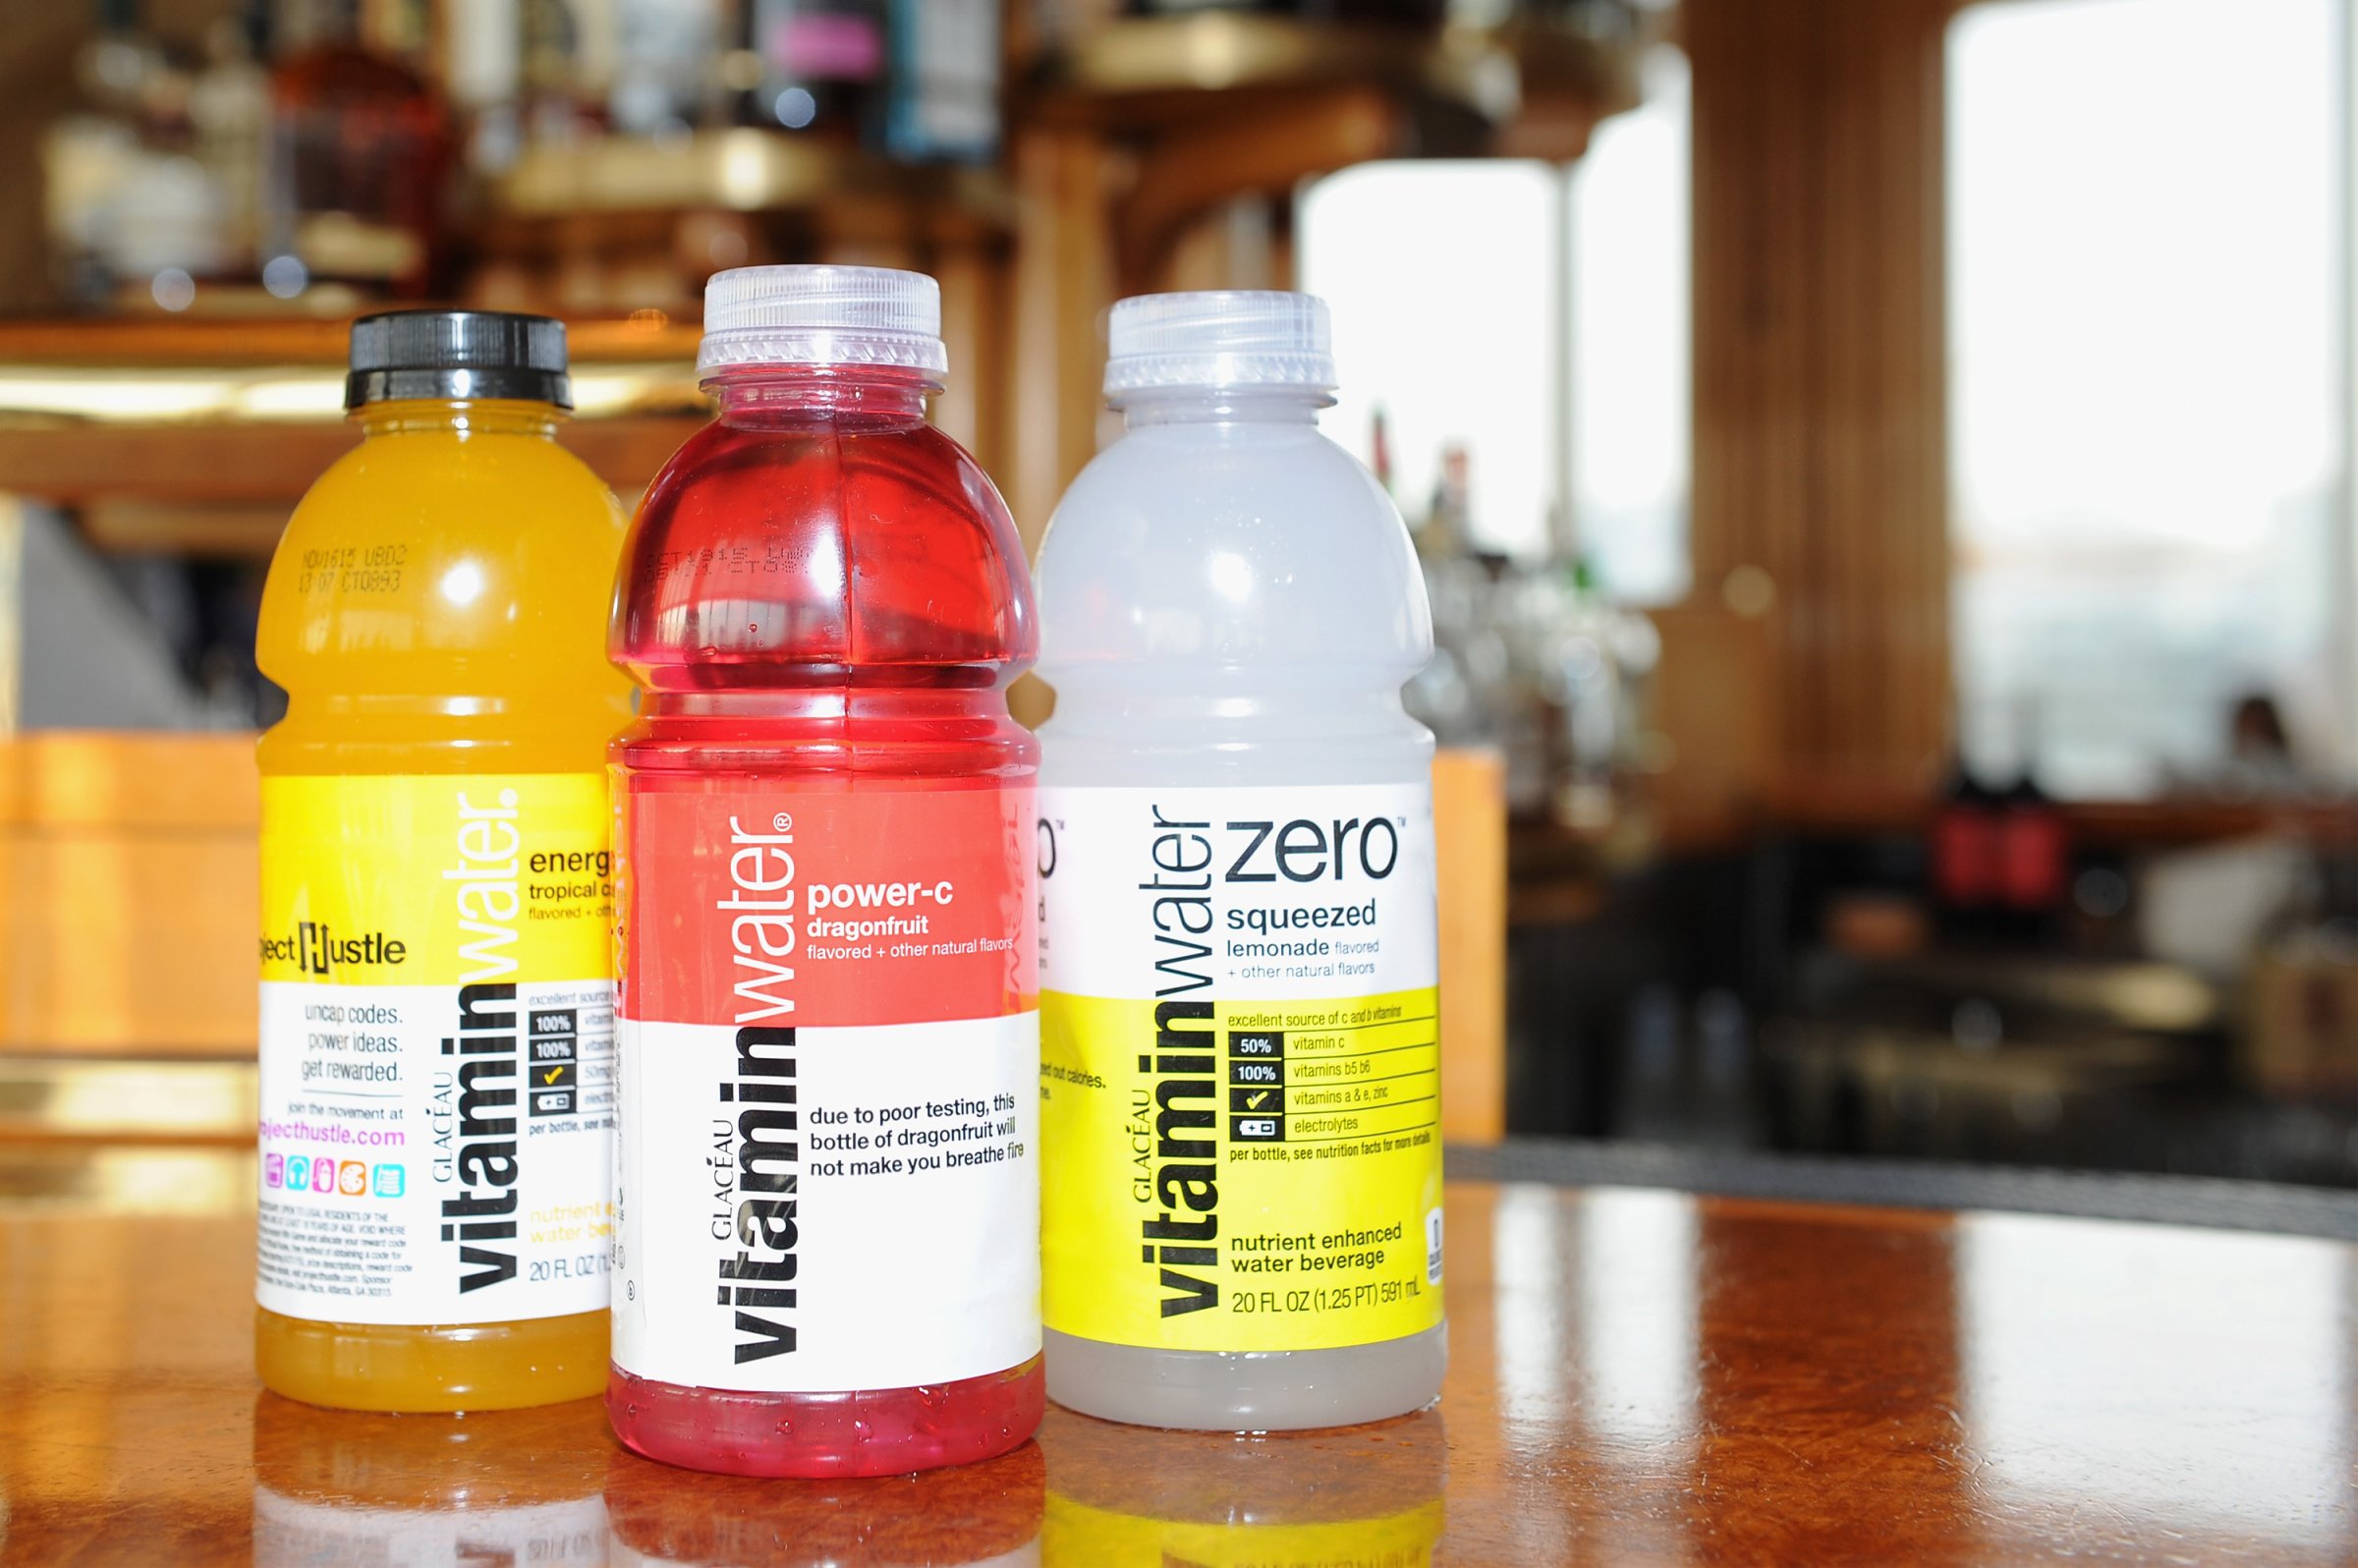 Vitaminwater at The Top of The Standard on May 29, 2015 in New York City.